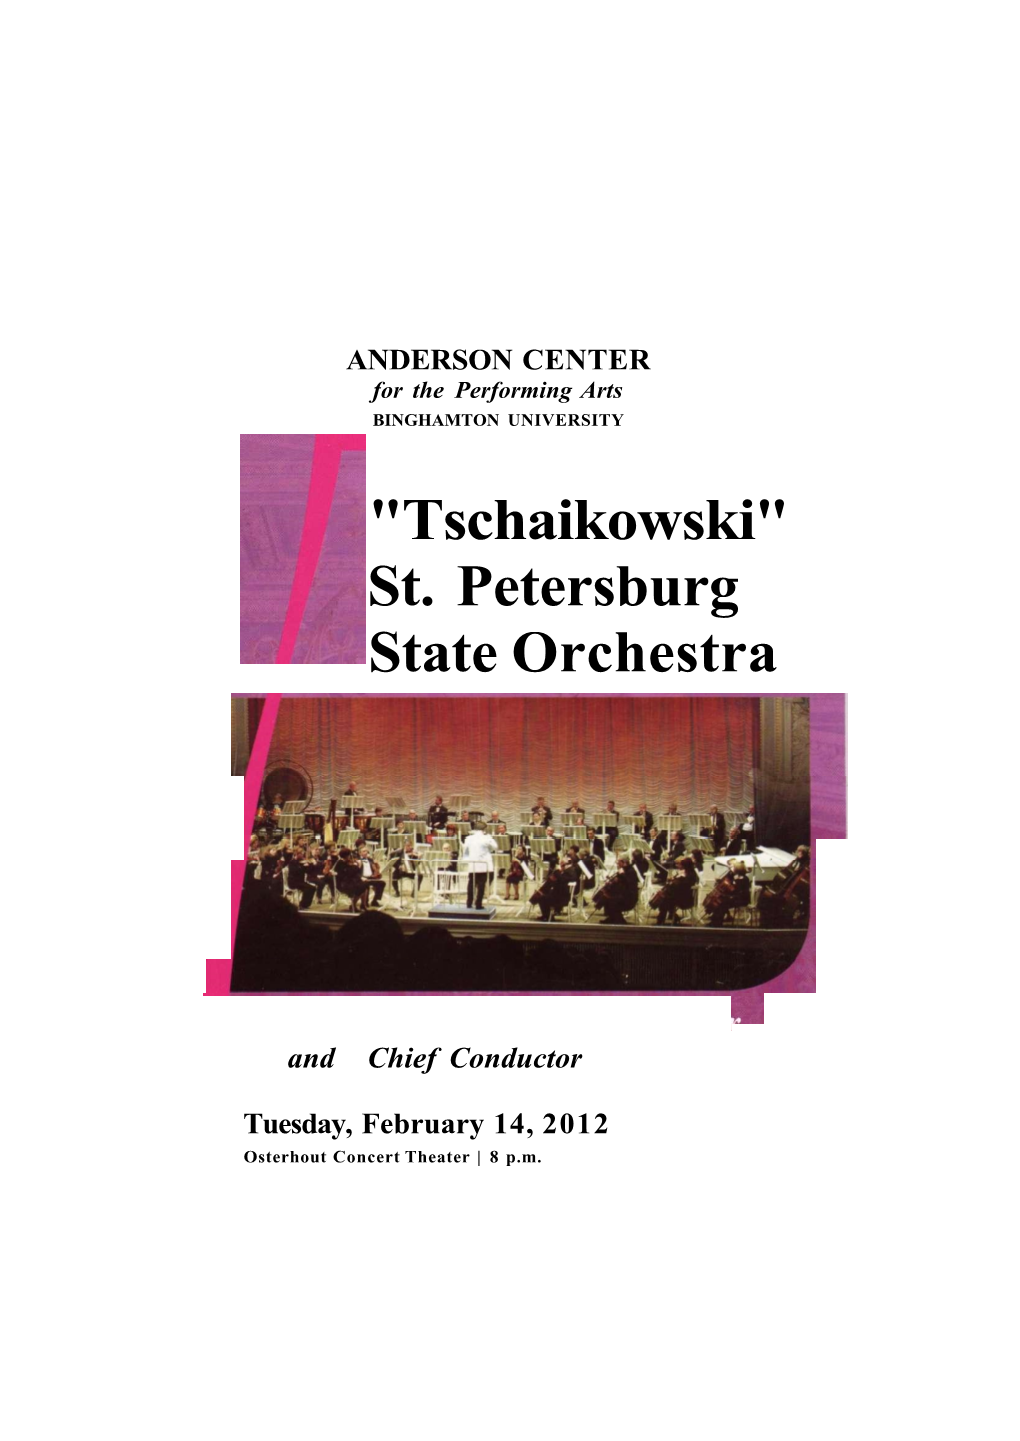 St. Petersburg State Orchestra